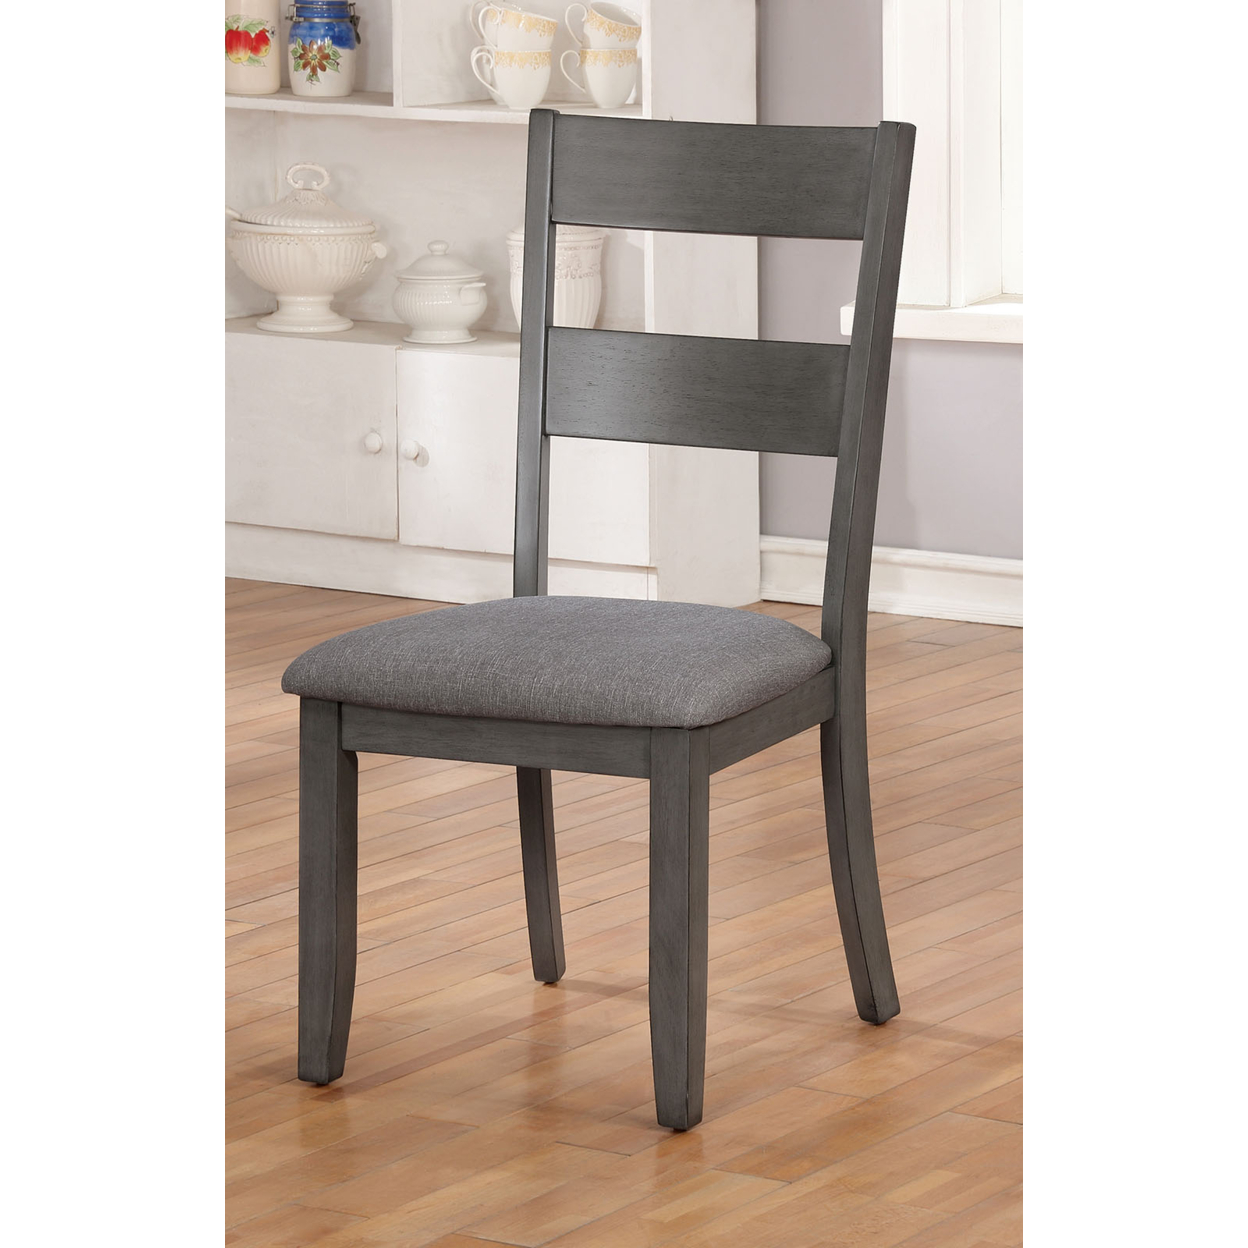 Wooden Side Chair With Fabric Padded Seat, Pack Of Two, Gray- Saltoro Sherpi